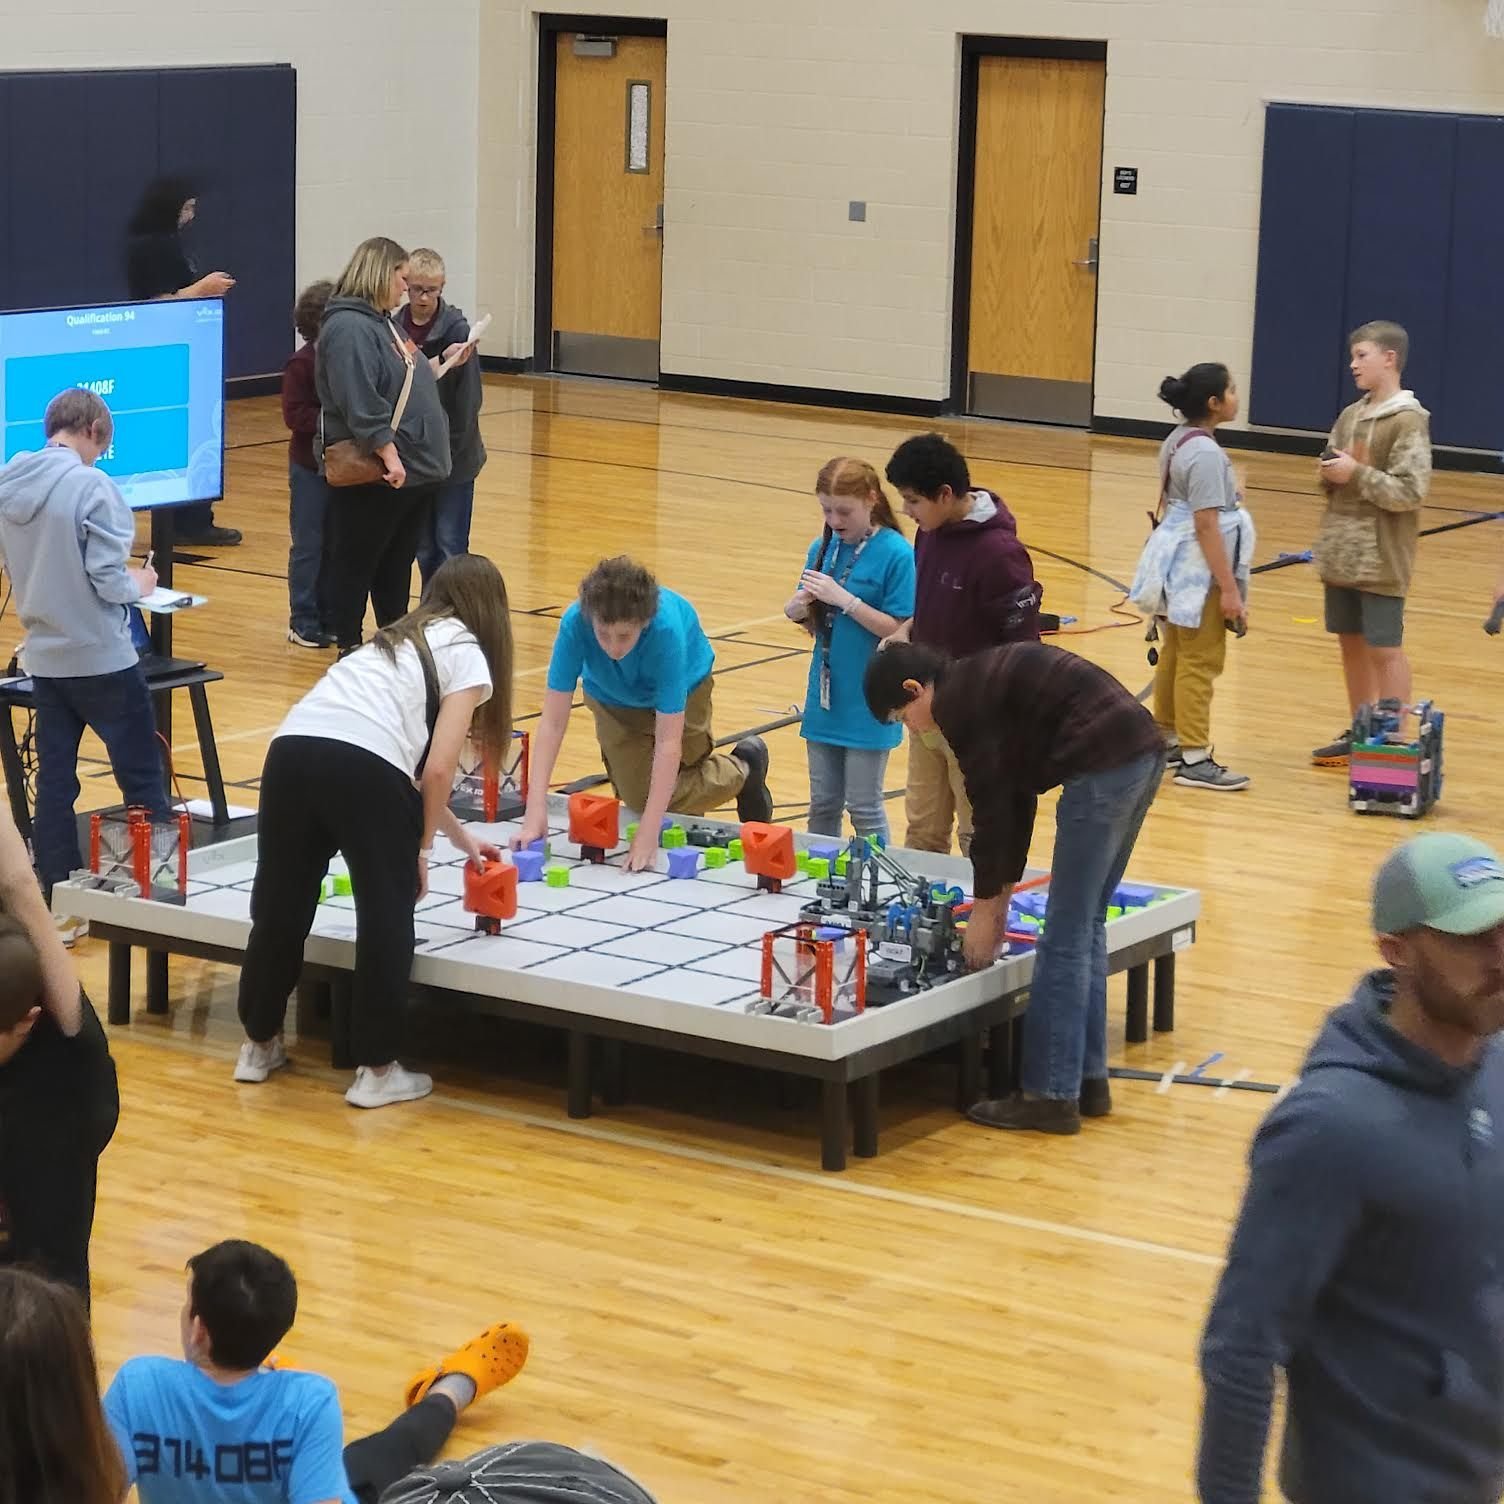 During our spring 2023 PAT Community Grant cycle, we awarded the Chisholm Robotics club a grant to help update their VEX robotic equipment and get more equipment to expand their program. With this grant Chisholm updated their middle school robotics k